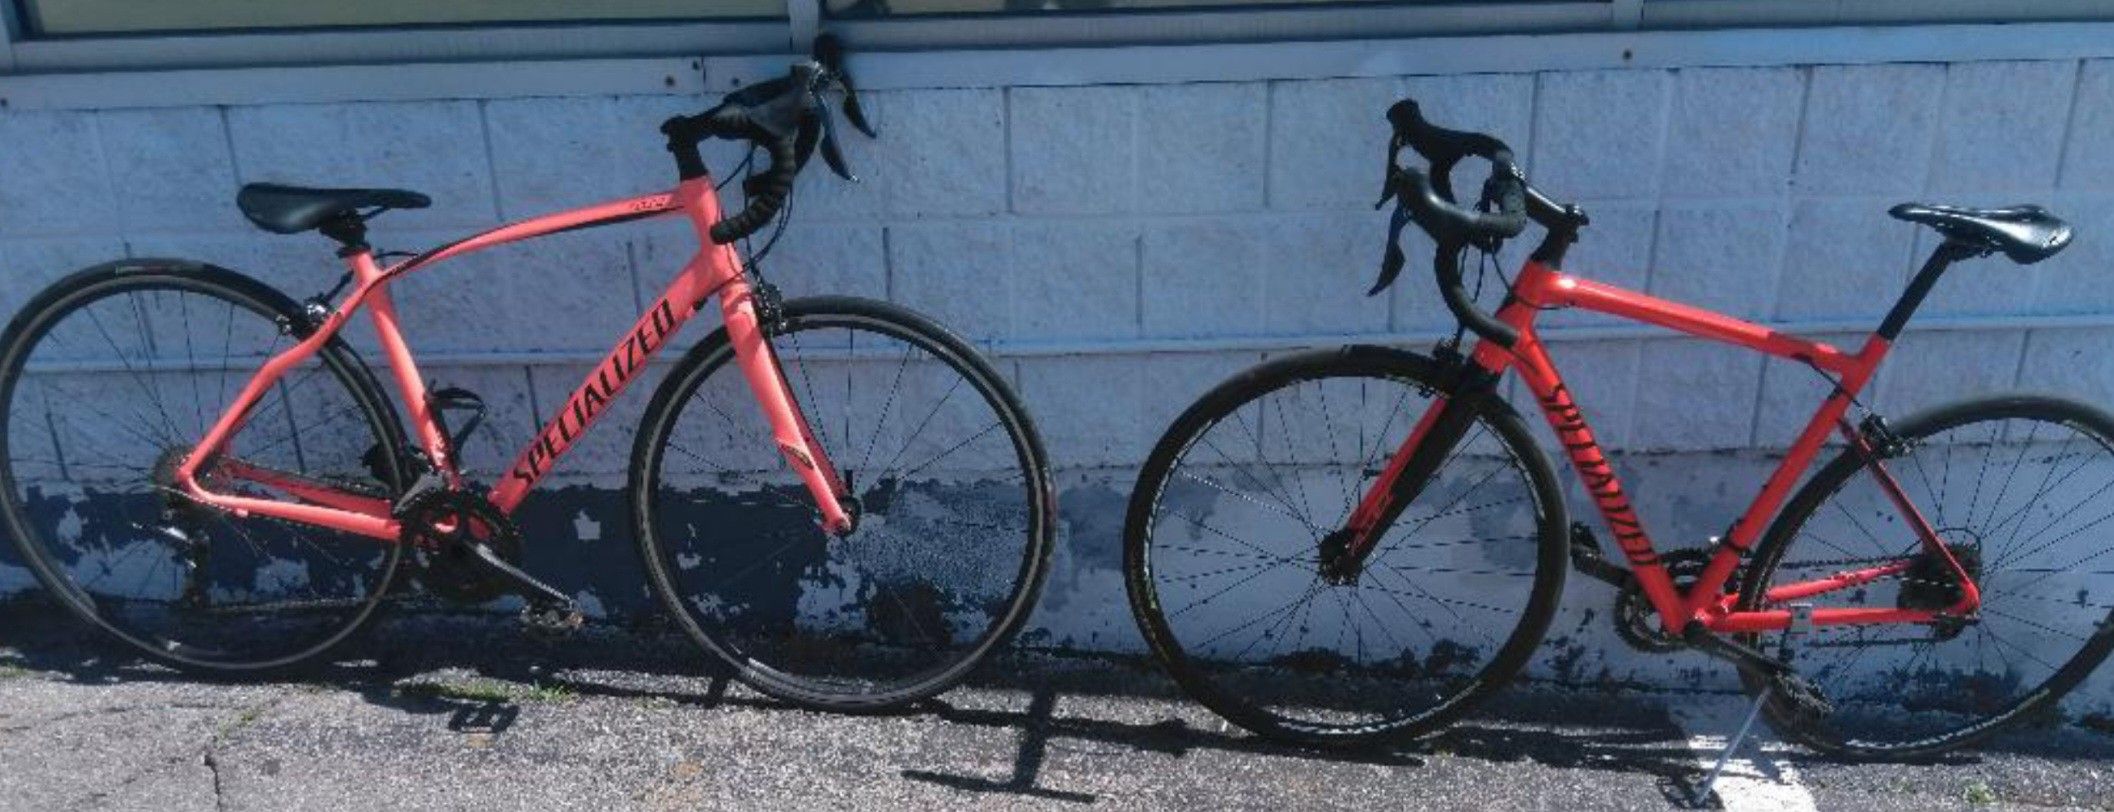 Hiis And Hers Specialized Bikes